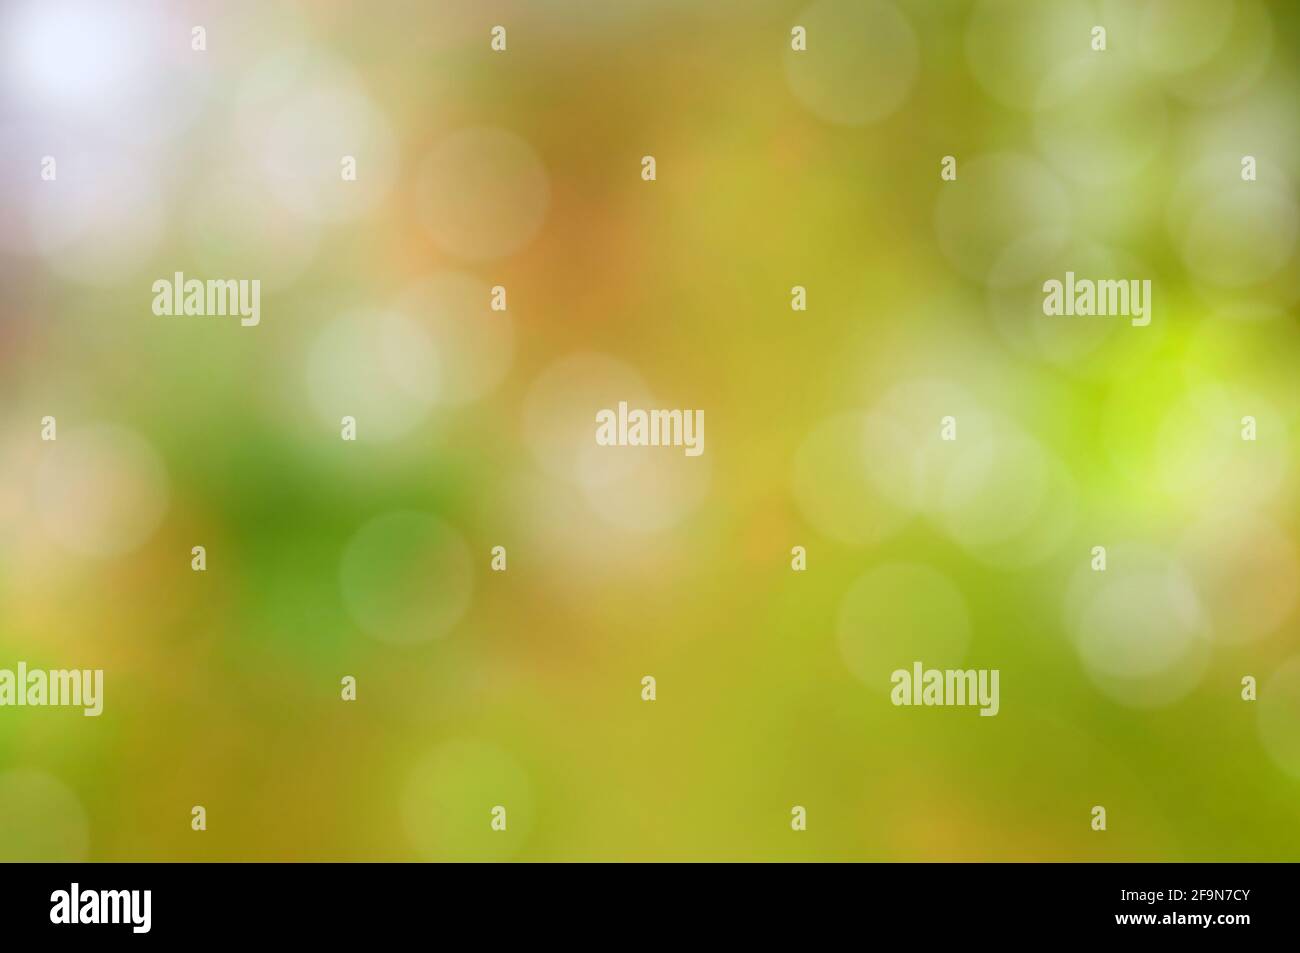 Abstract colorful green background with bokeh or lens flare effect Stock Photo